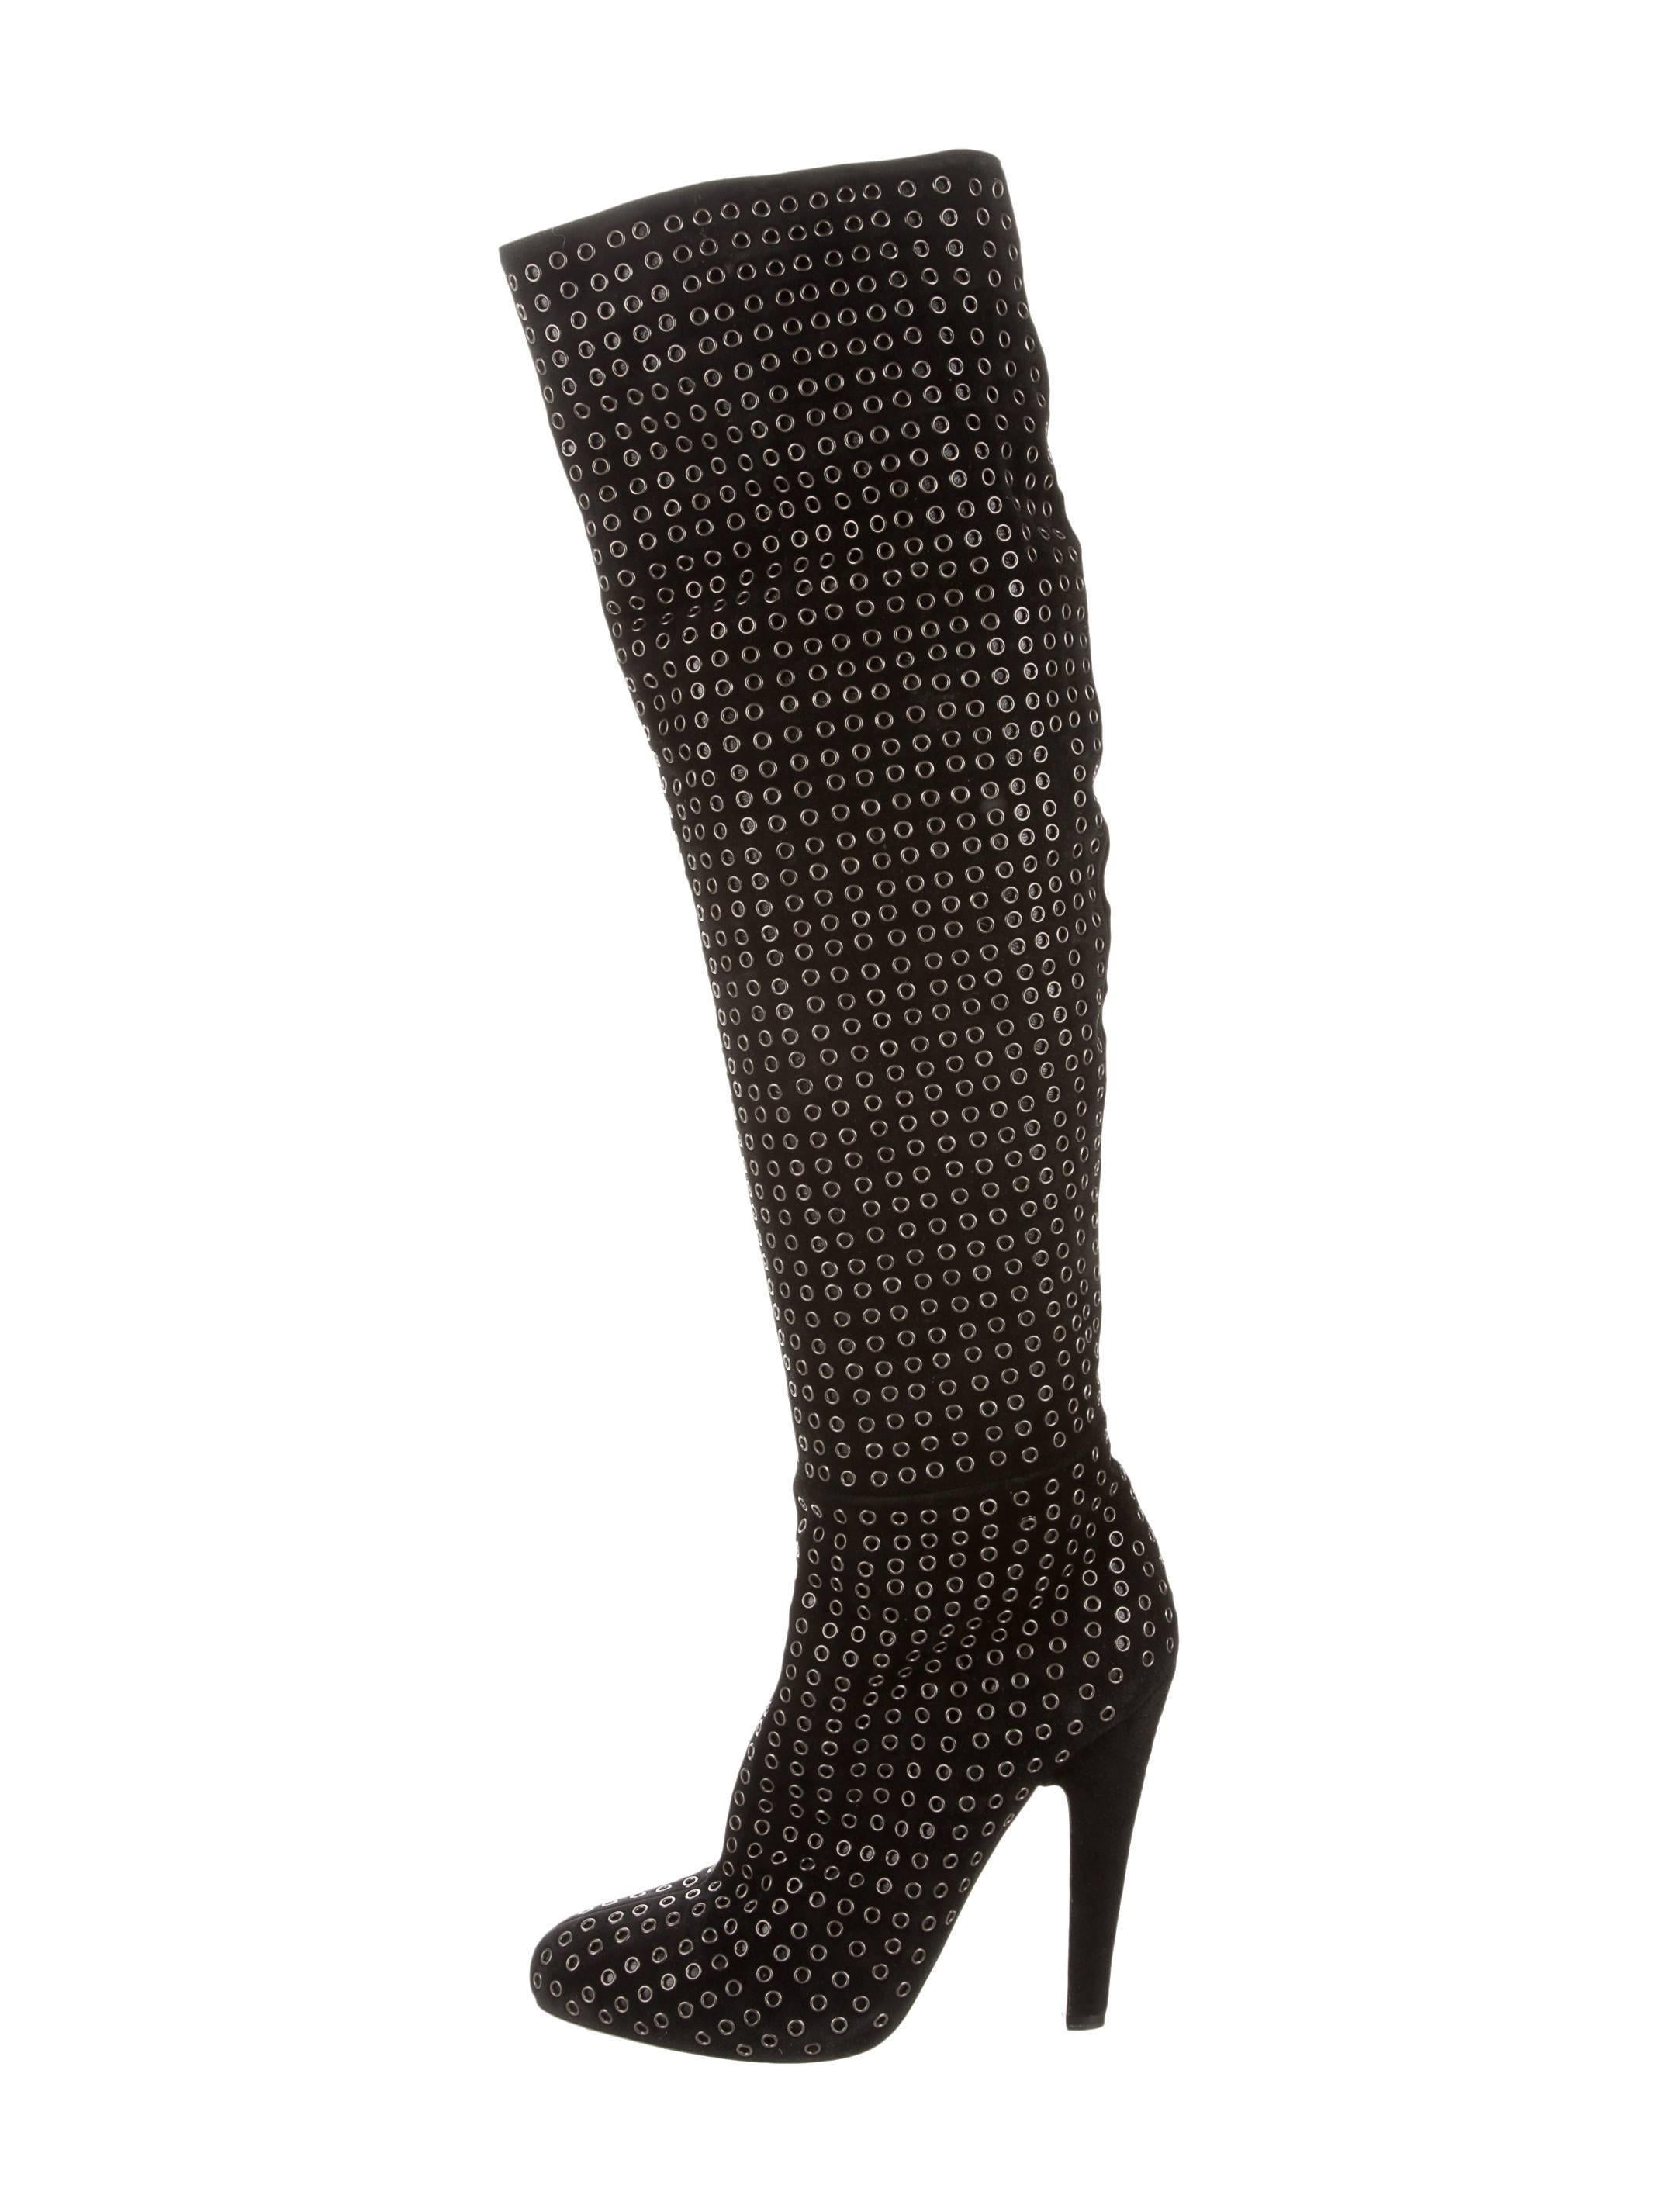 Women's Alaia NEW & SOLD OUT Black Suede Gunmetal Hardware Knee Boots in Dust Bag